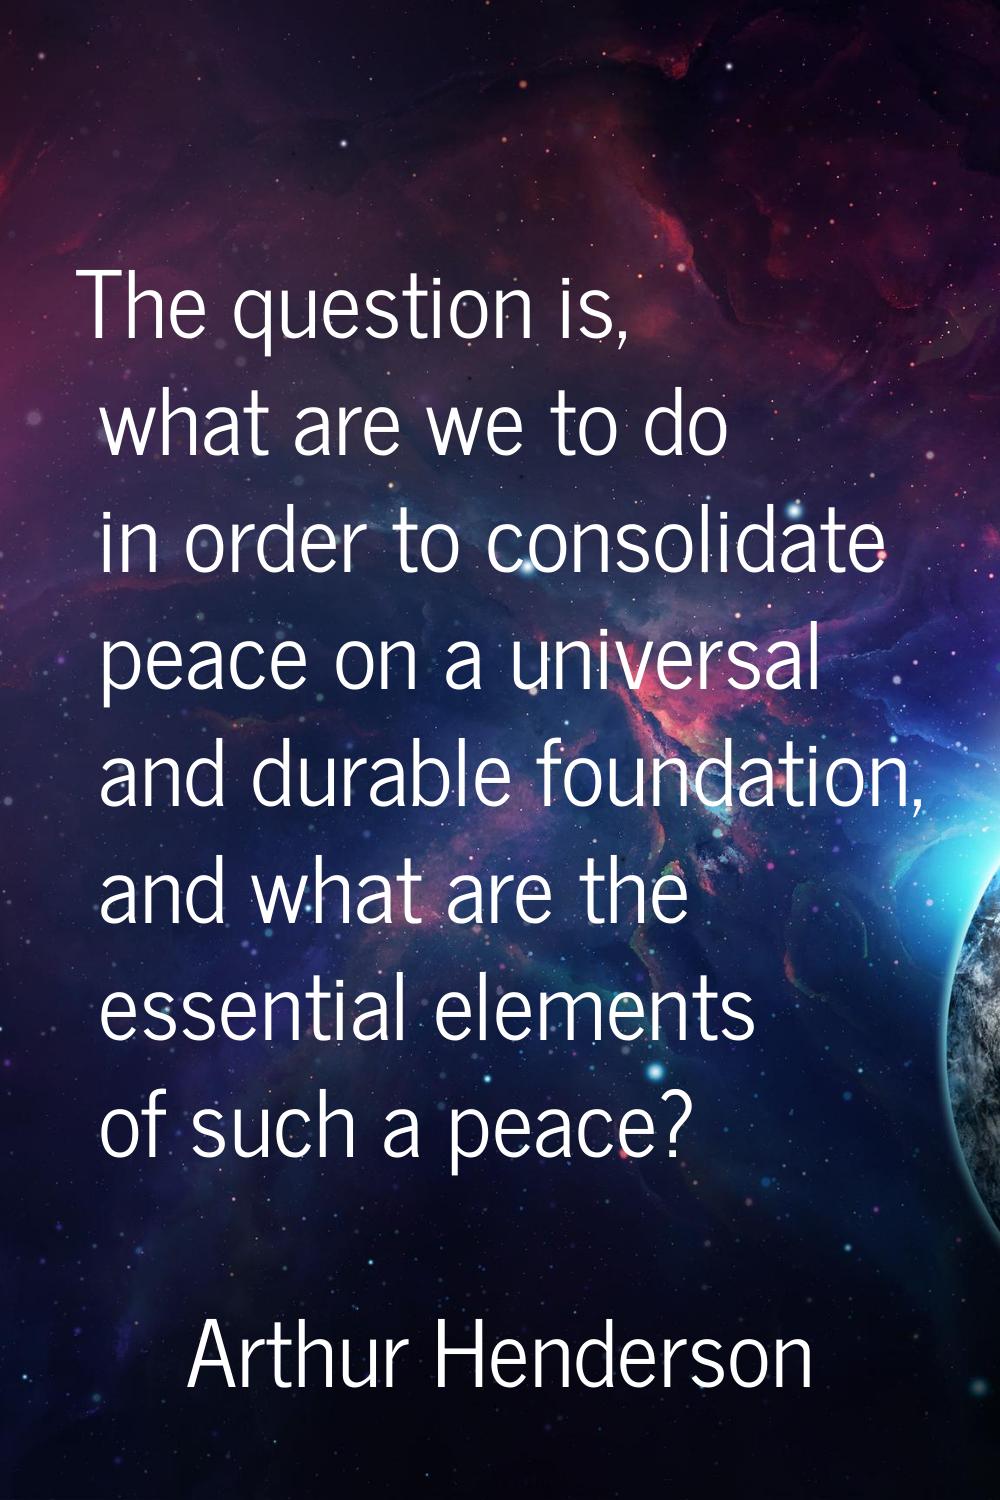 The question is, what are we to do in order to consolidate peace on a universal and durable foundat